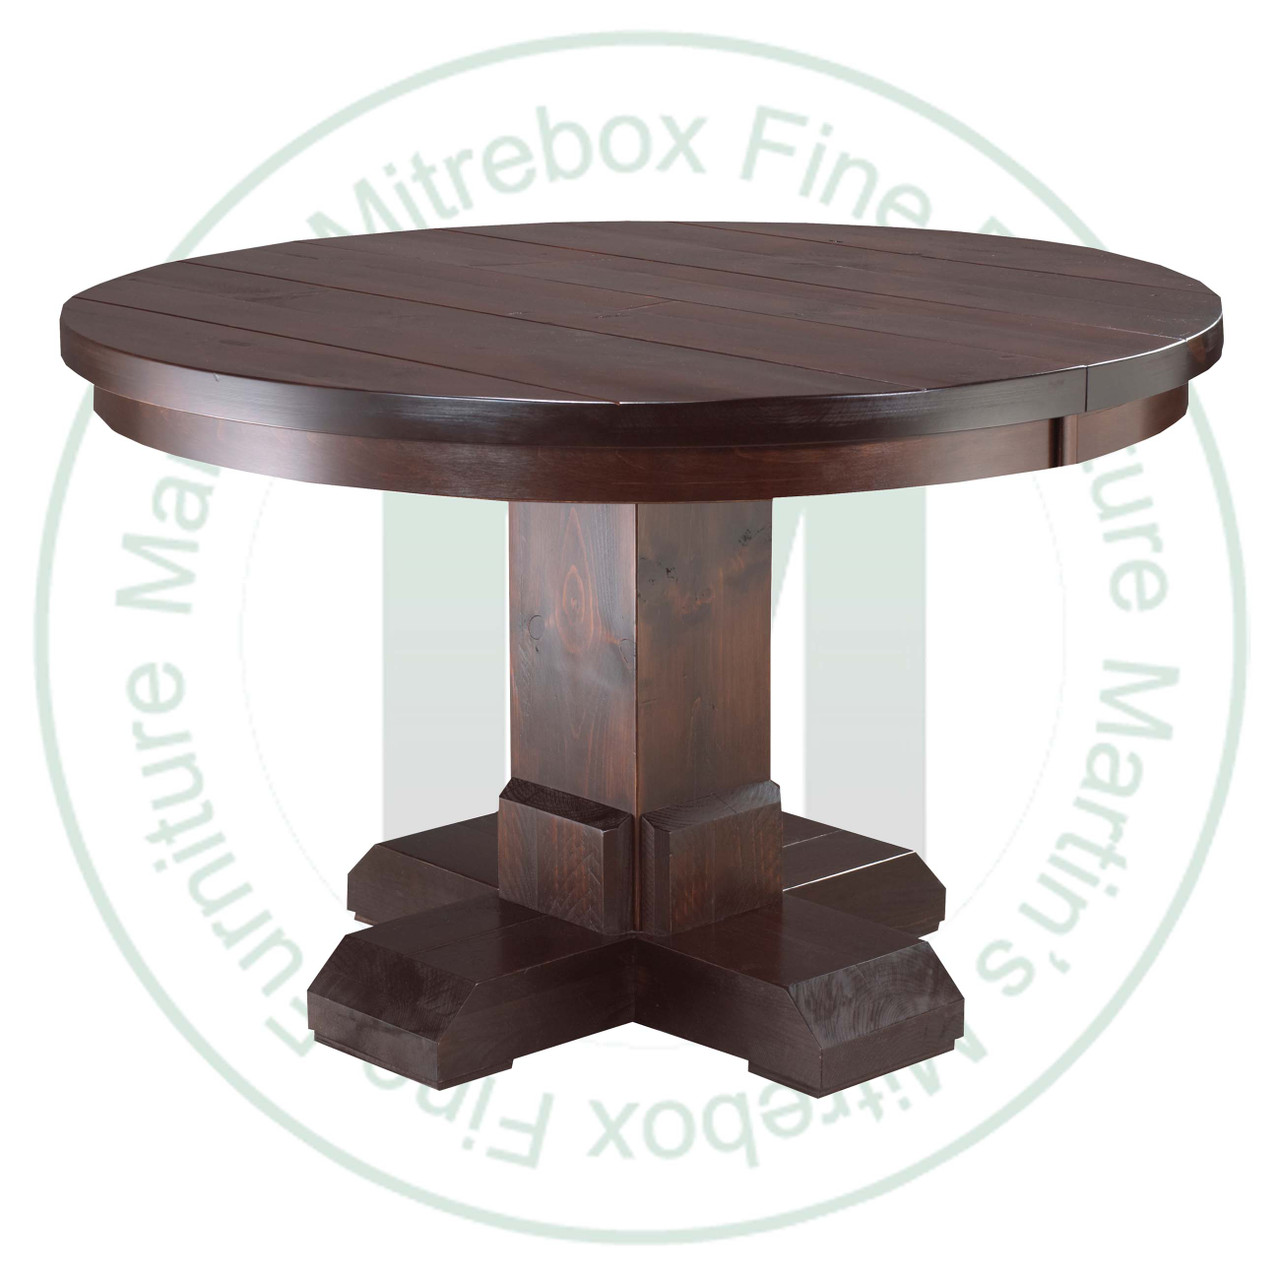 Wormy Maple Shrewsbury Single Pedestal Table 42''D x 48''W x 30''H With 1 - 12'' Leaf Table. Table Has 1.25'' Thick Top.